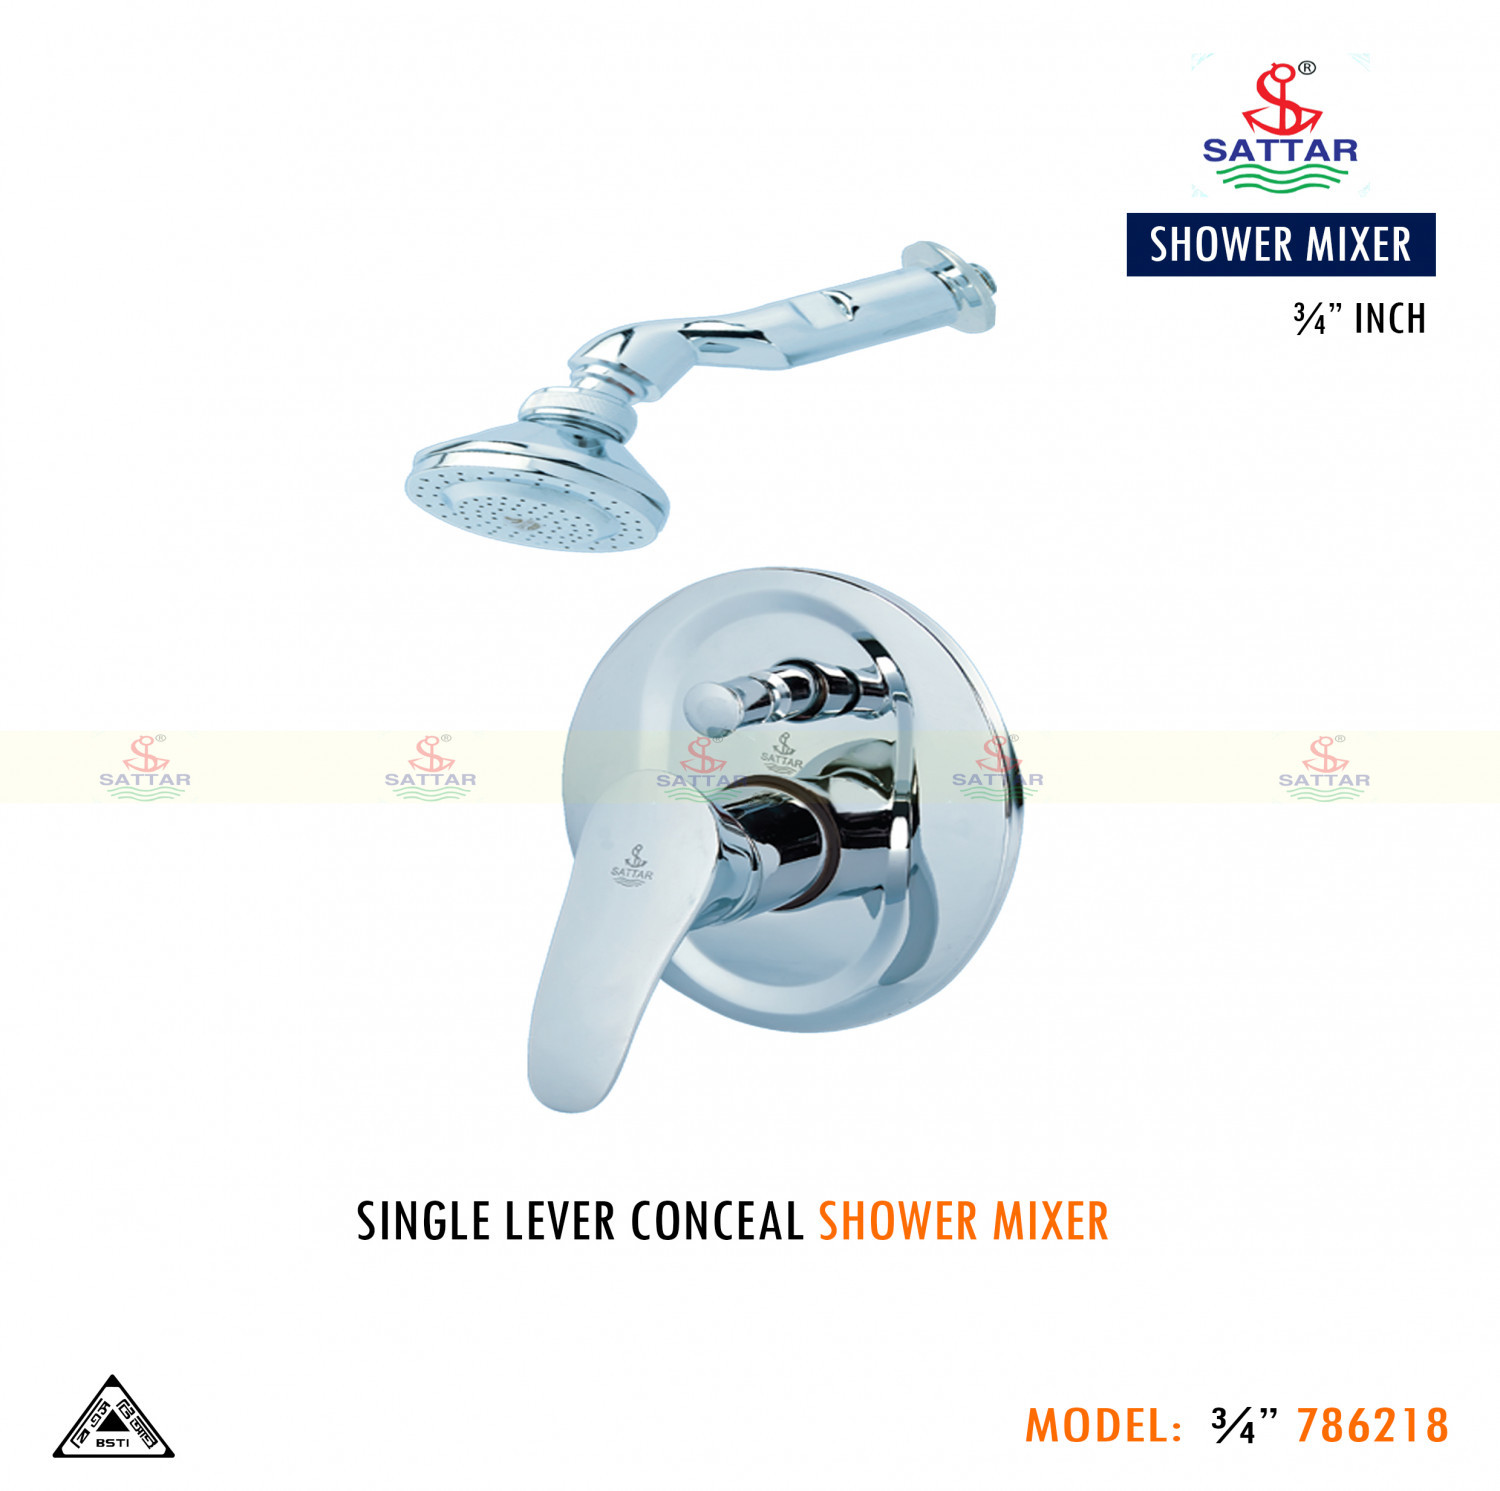 ¾” SHOWER MIXER AND CONCEAL SATTAR SMI-78613